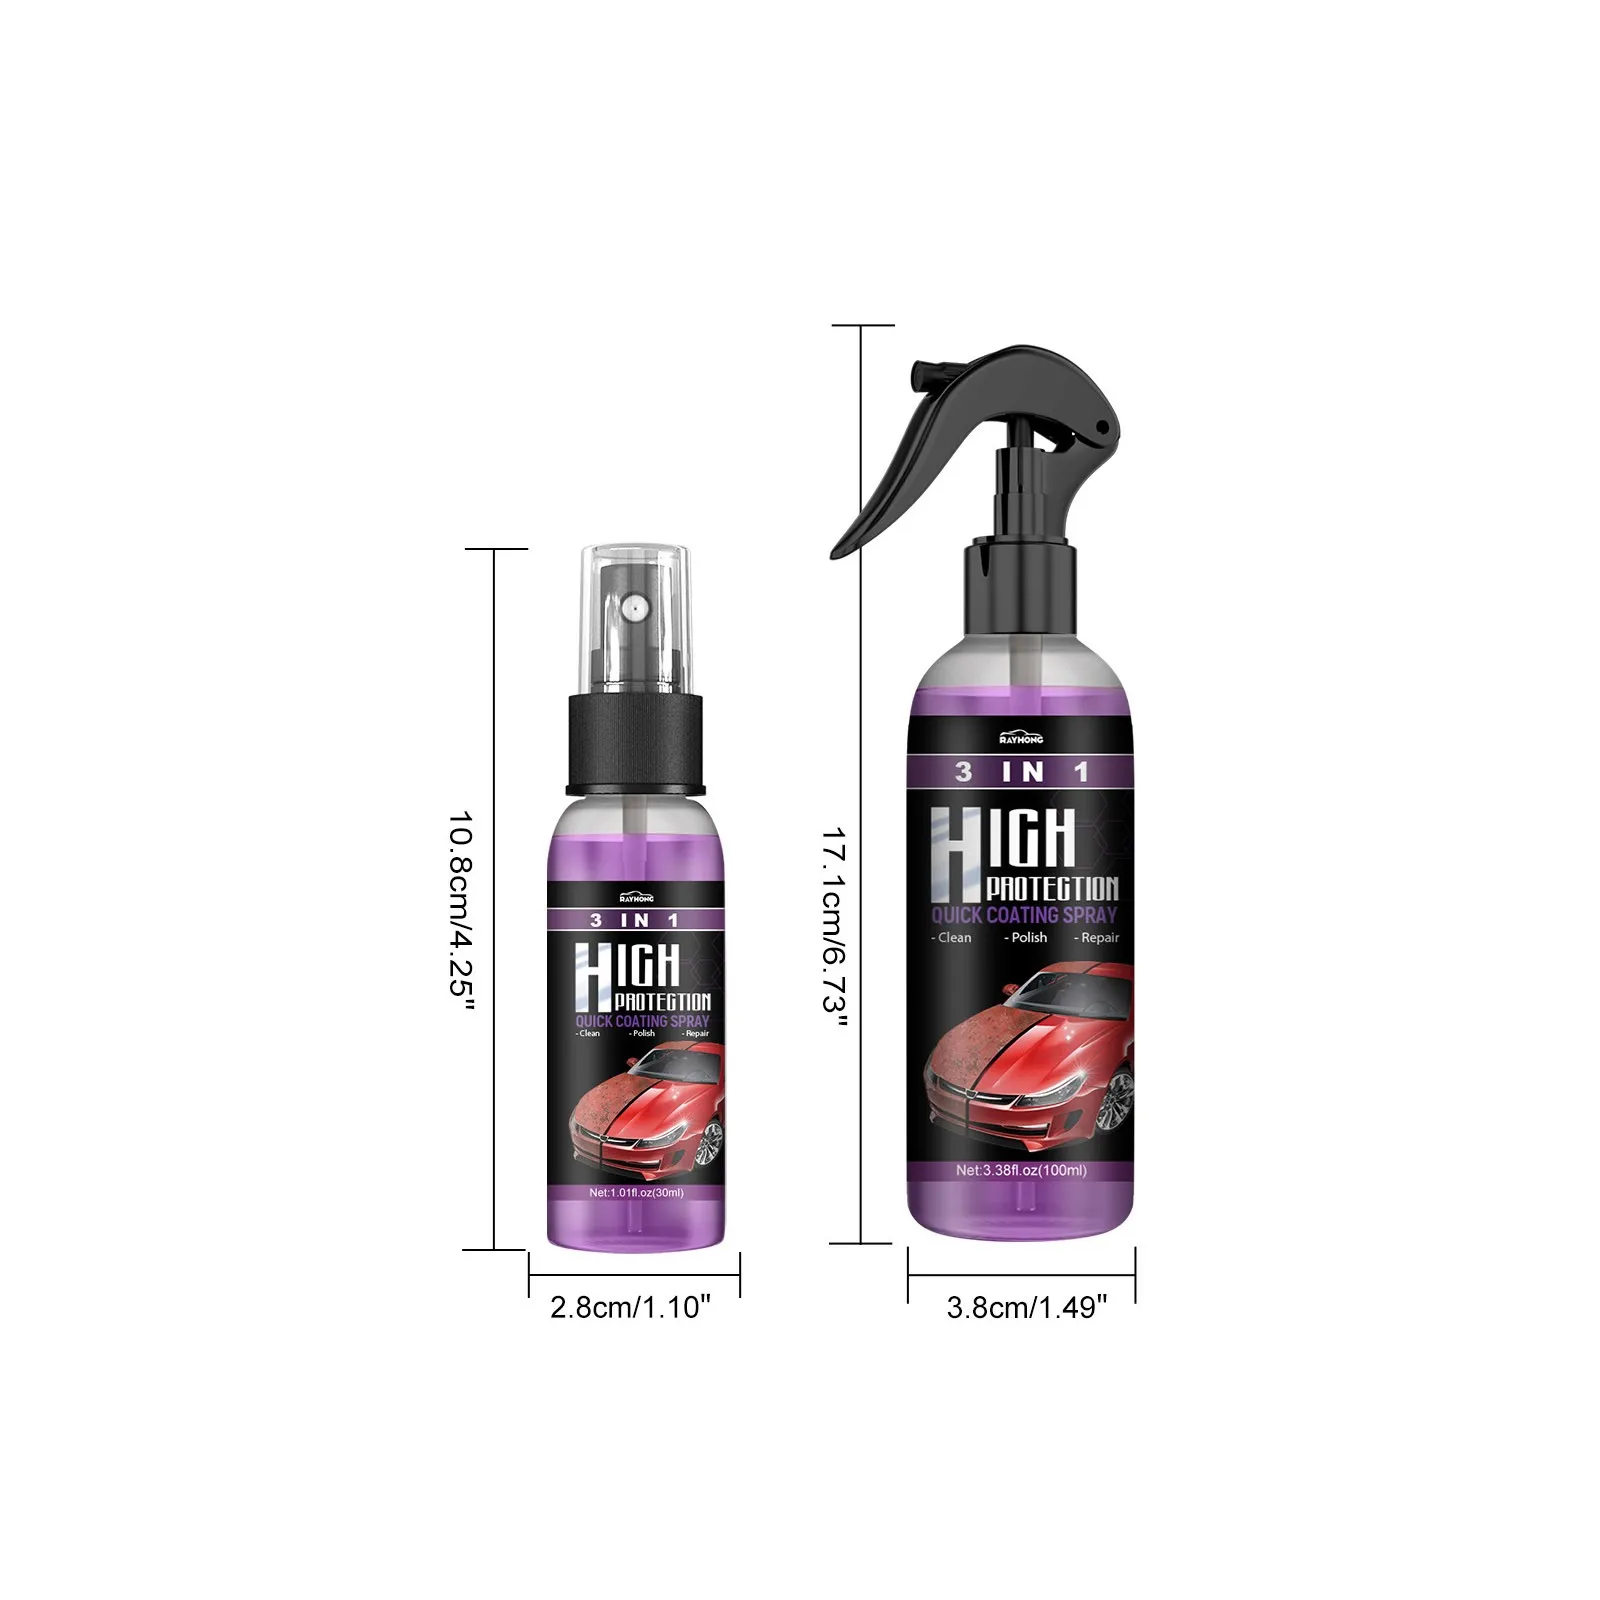 Coating Agent 3 In 1 High Protection Express Paint Spray, Ceramic Polishing  Spray, Plastic Part Refinisher, Auto Detailing Spray